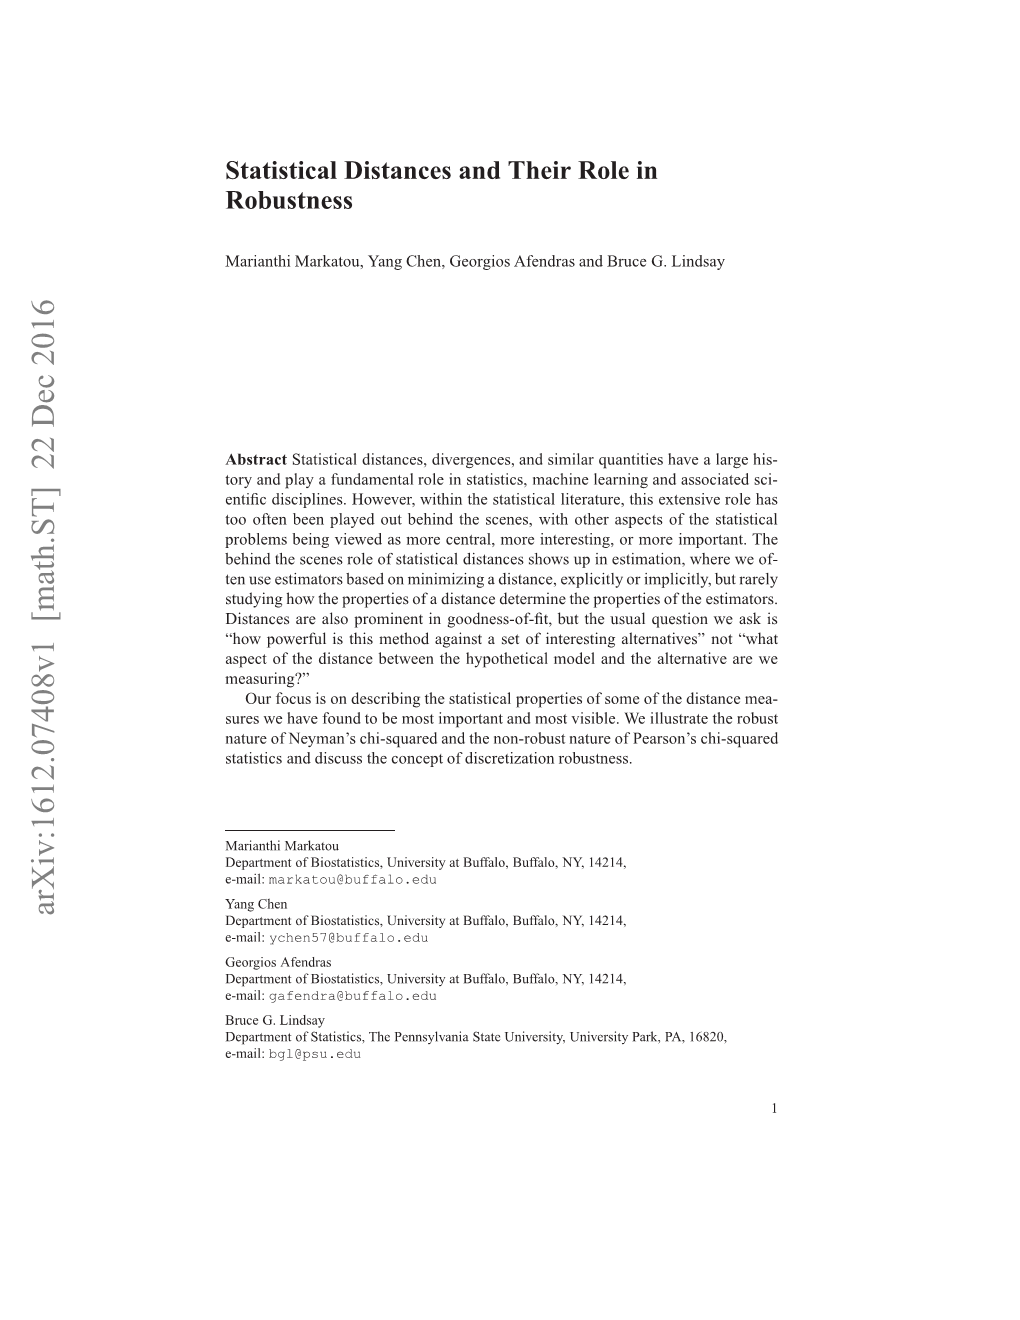 Statistical Distances and Their Role in Robustness 3